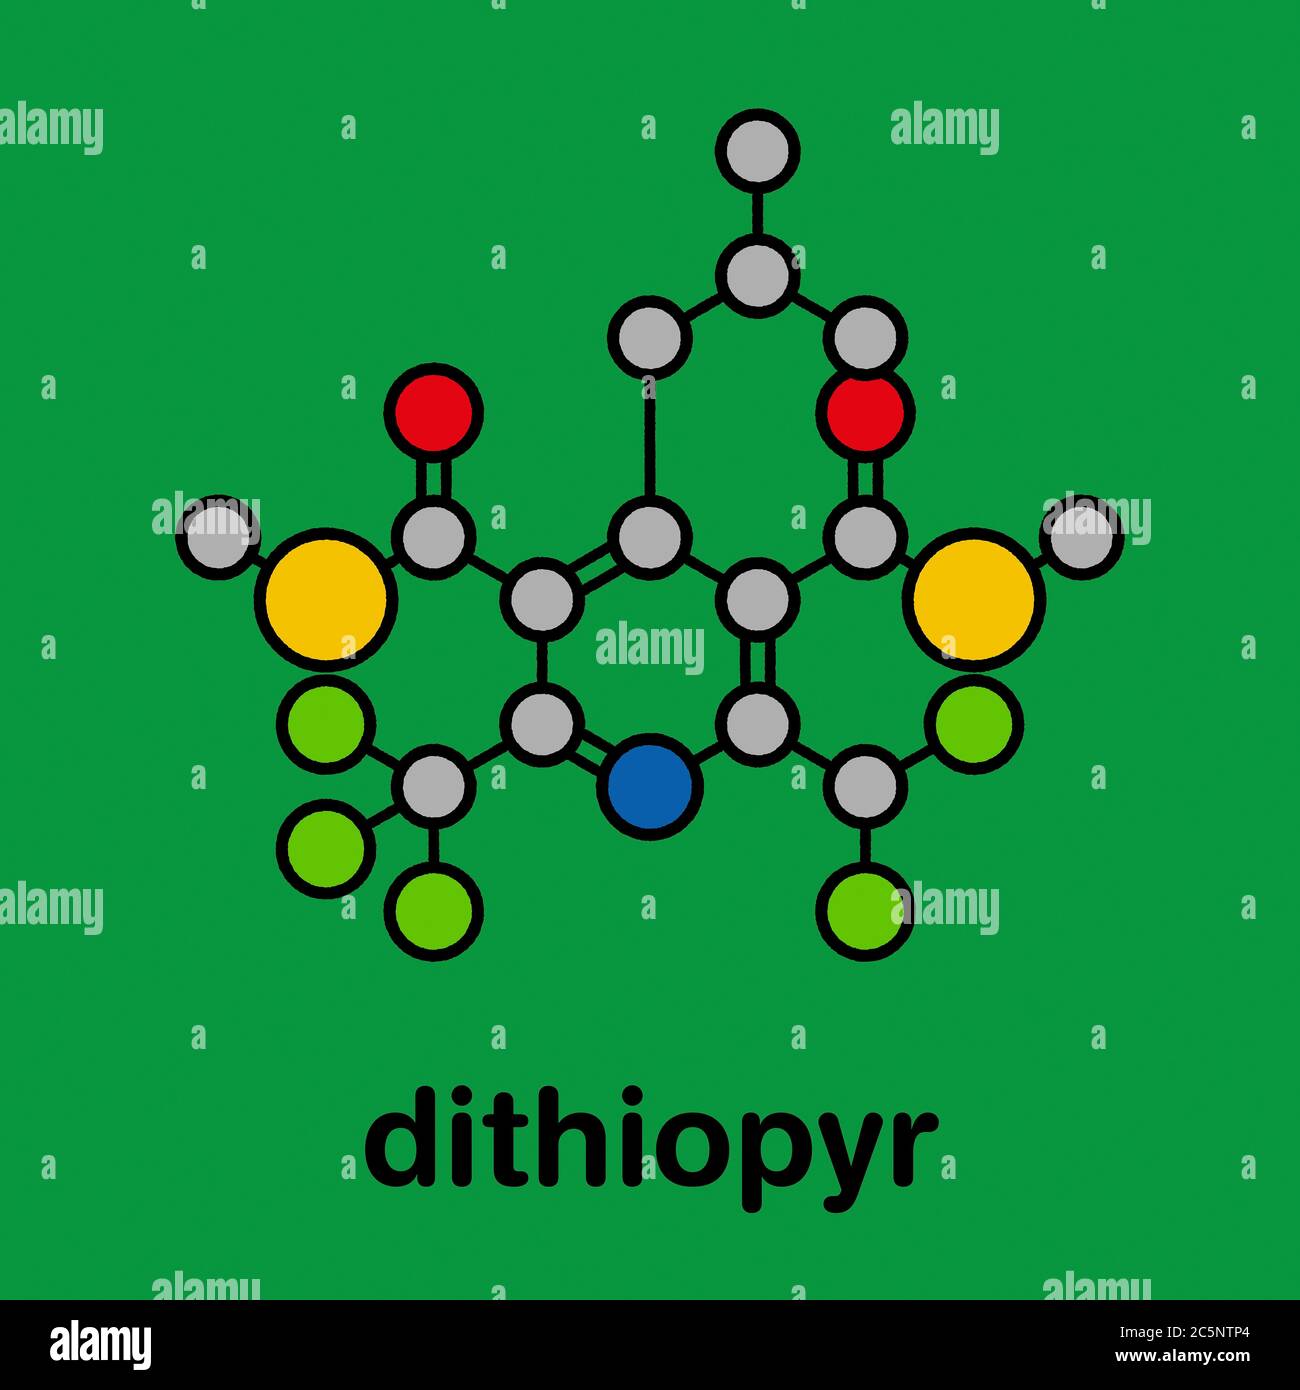 Dithiopyr preemergent herbicide molecule. Stylized skeletal formula (chemical structure): Atoms are shown as color-coded circles: hydrogen (hidden), carbon (grey), oxygen (red), nitrogen (blue), sulfur (yellow), fluorine (cyan). Stock Photo